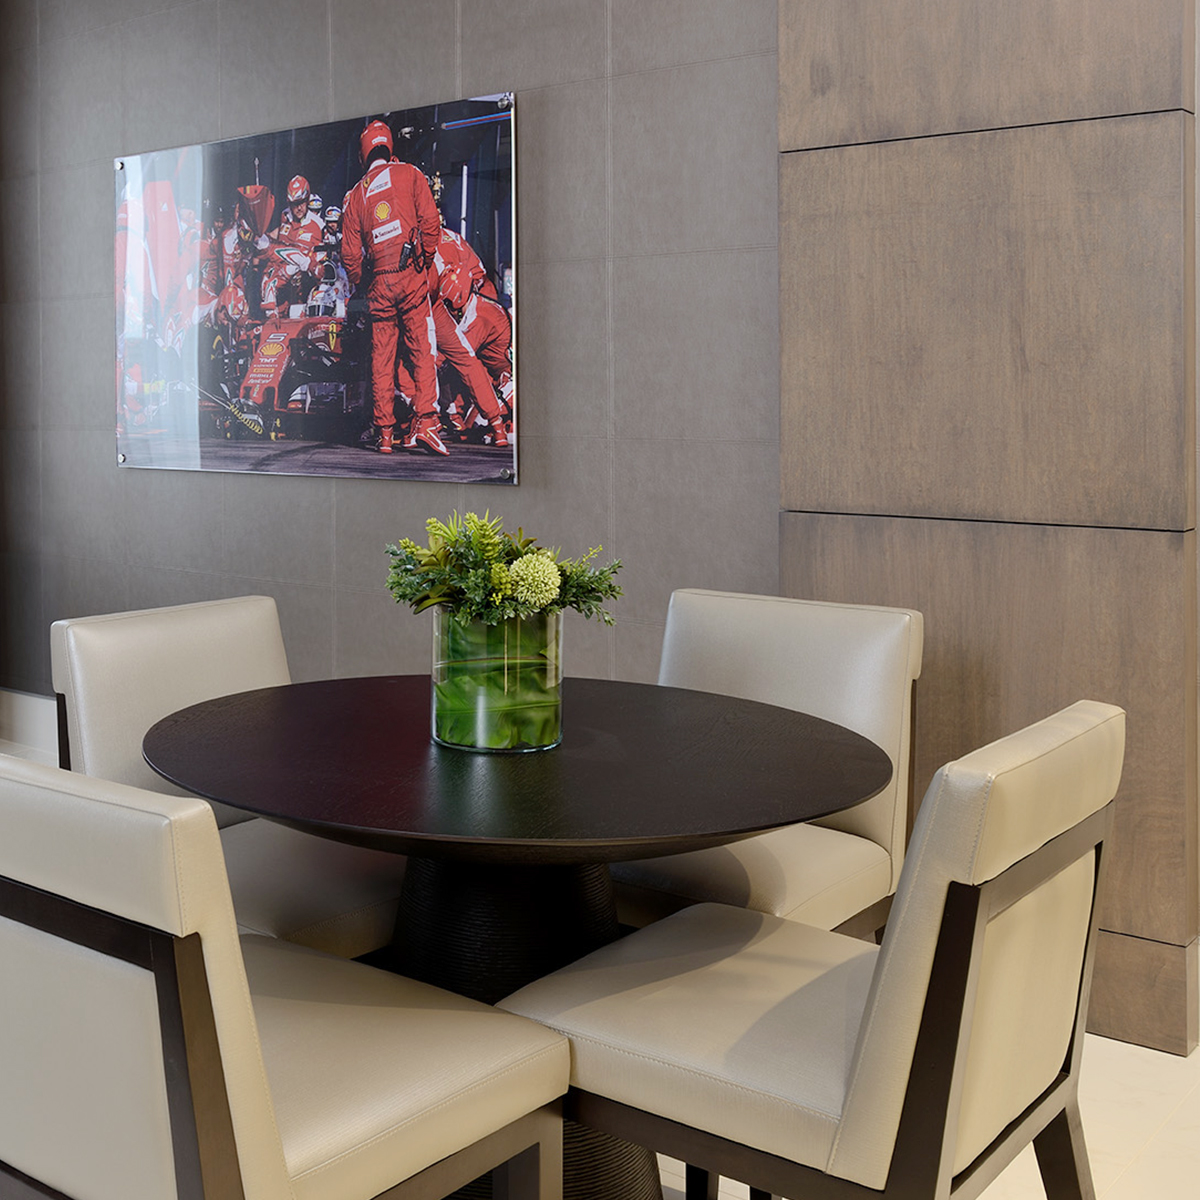 Modern industrial dining area with Ferrari artwork on the walls